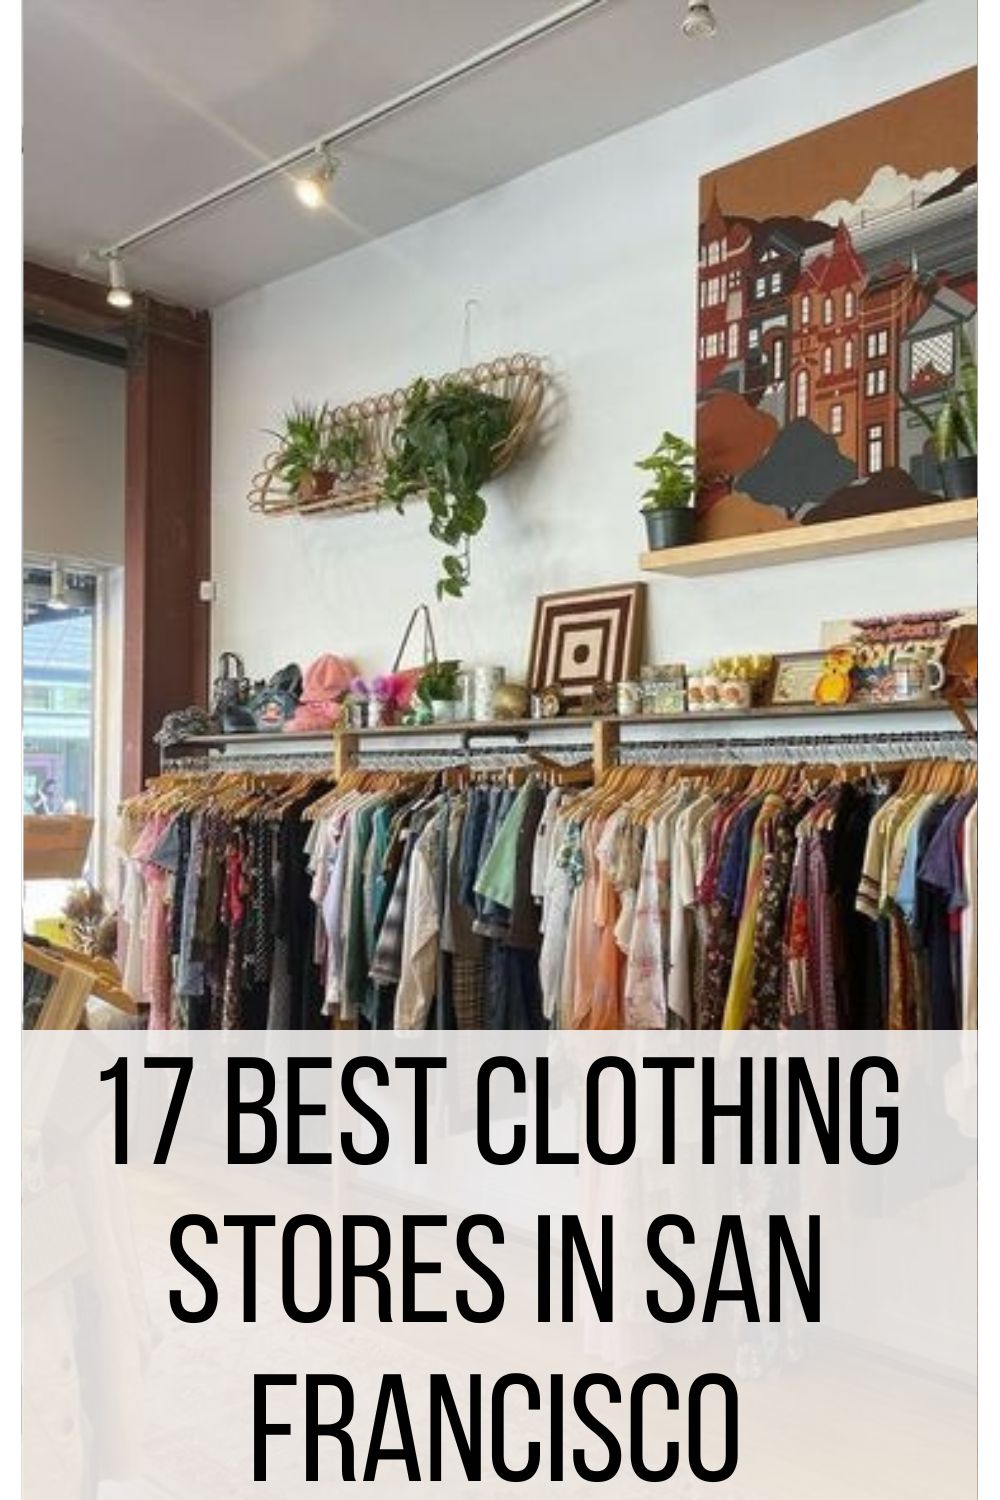 17 Best Clothing Stores in San Francisco